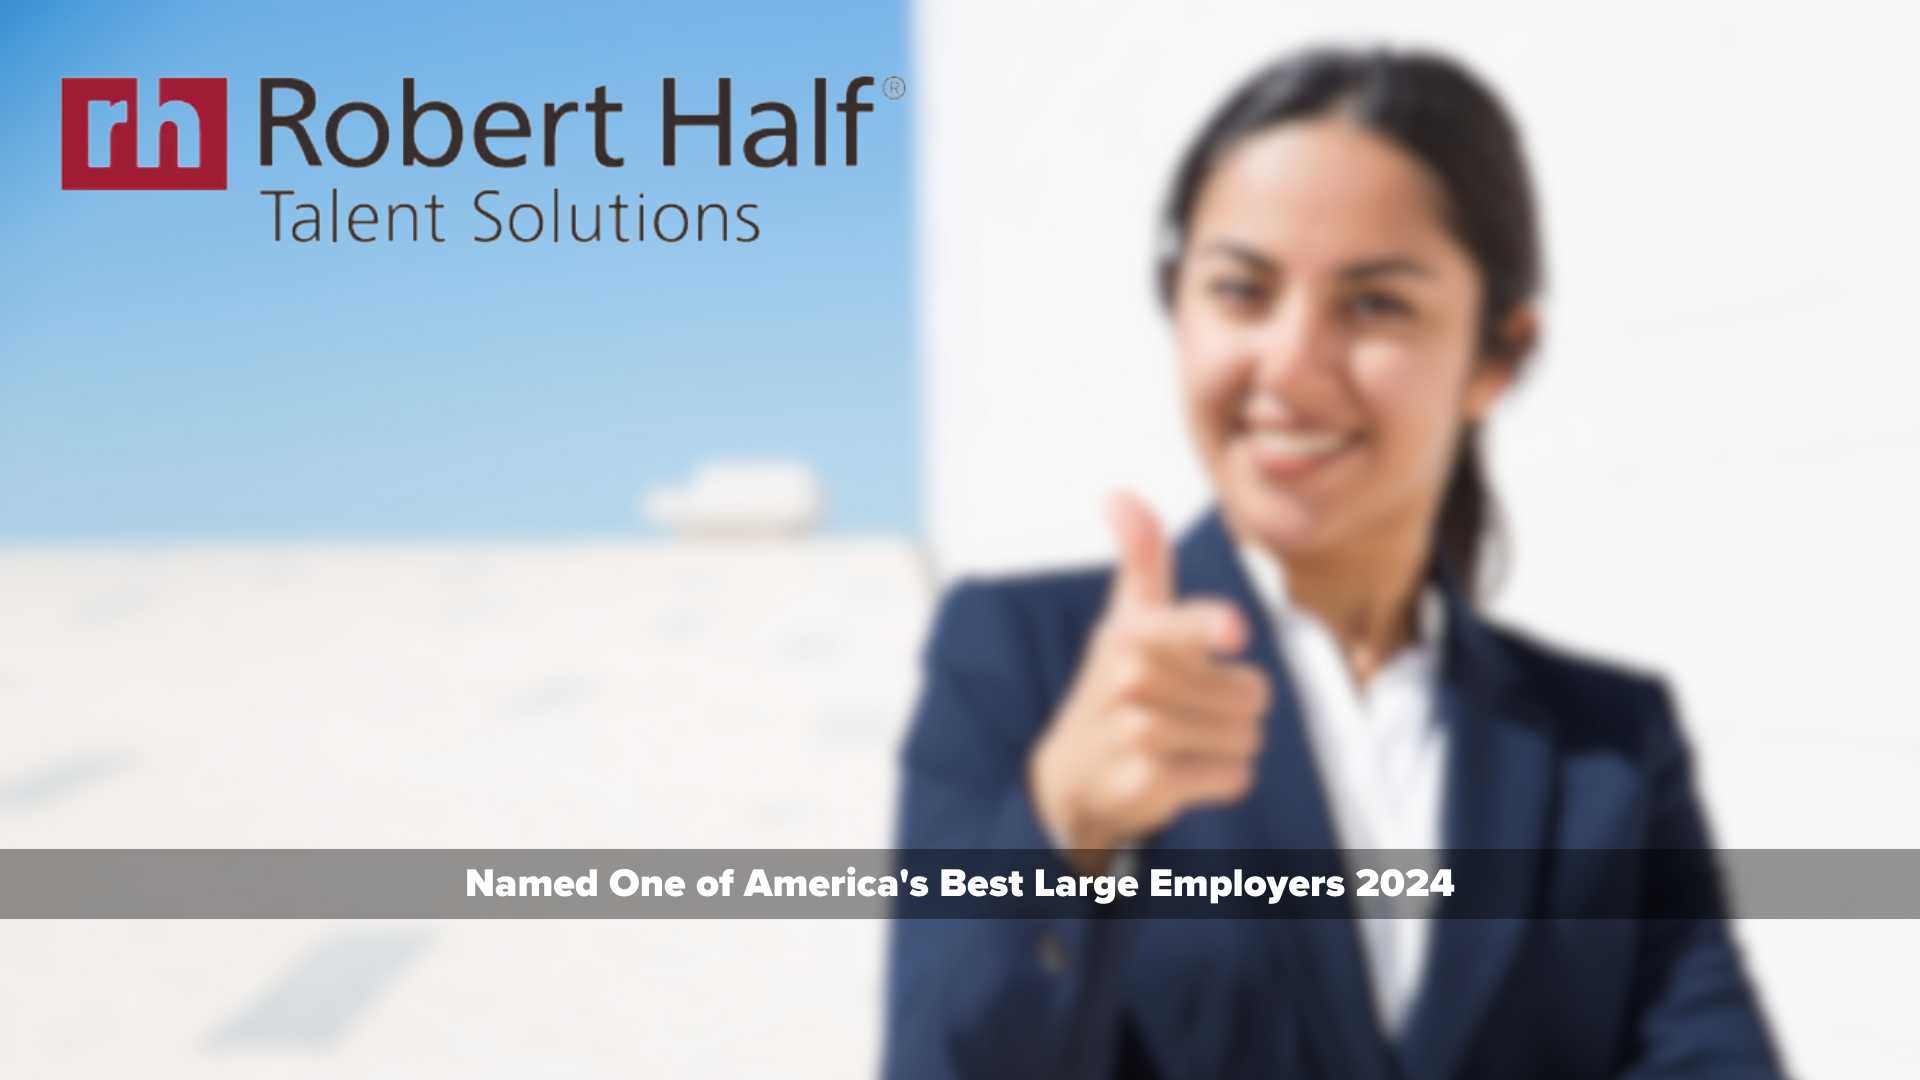 Robert Half Named One of America's Best Large Employers 2024 by Forbes